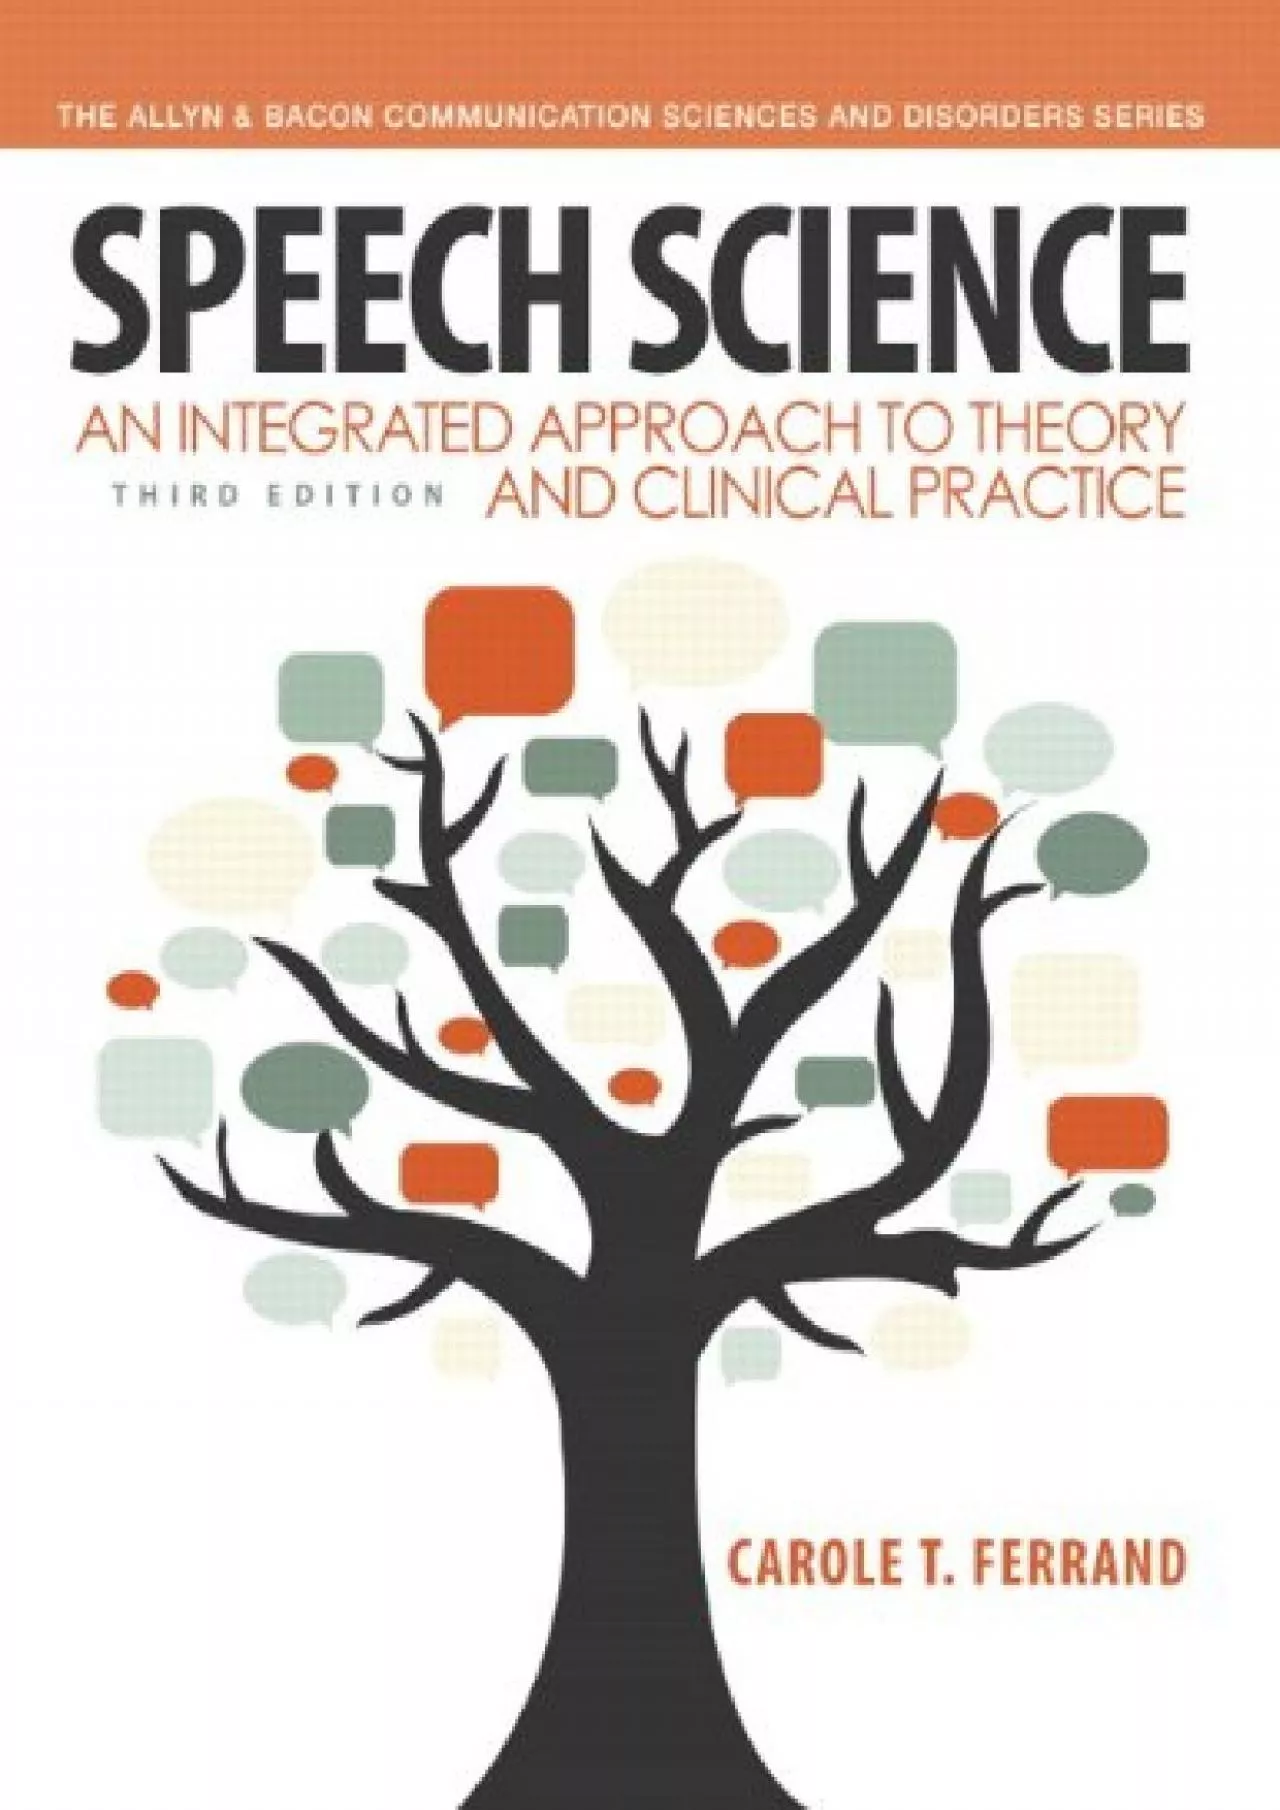 (BOOK)-Speech Science: An Integrated Approach to Theory and Clinical Practice (3rd Edition)